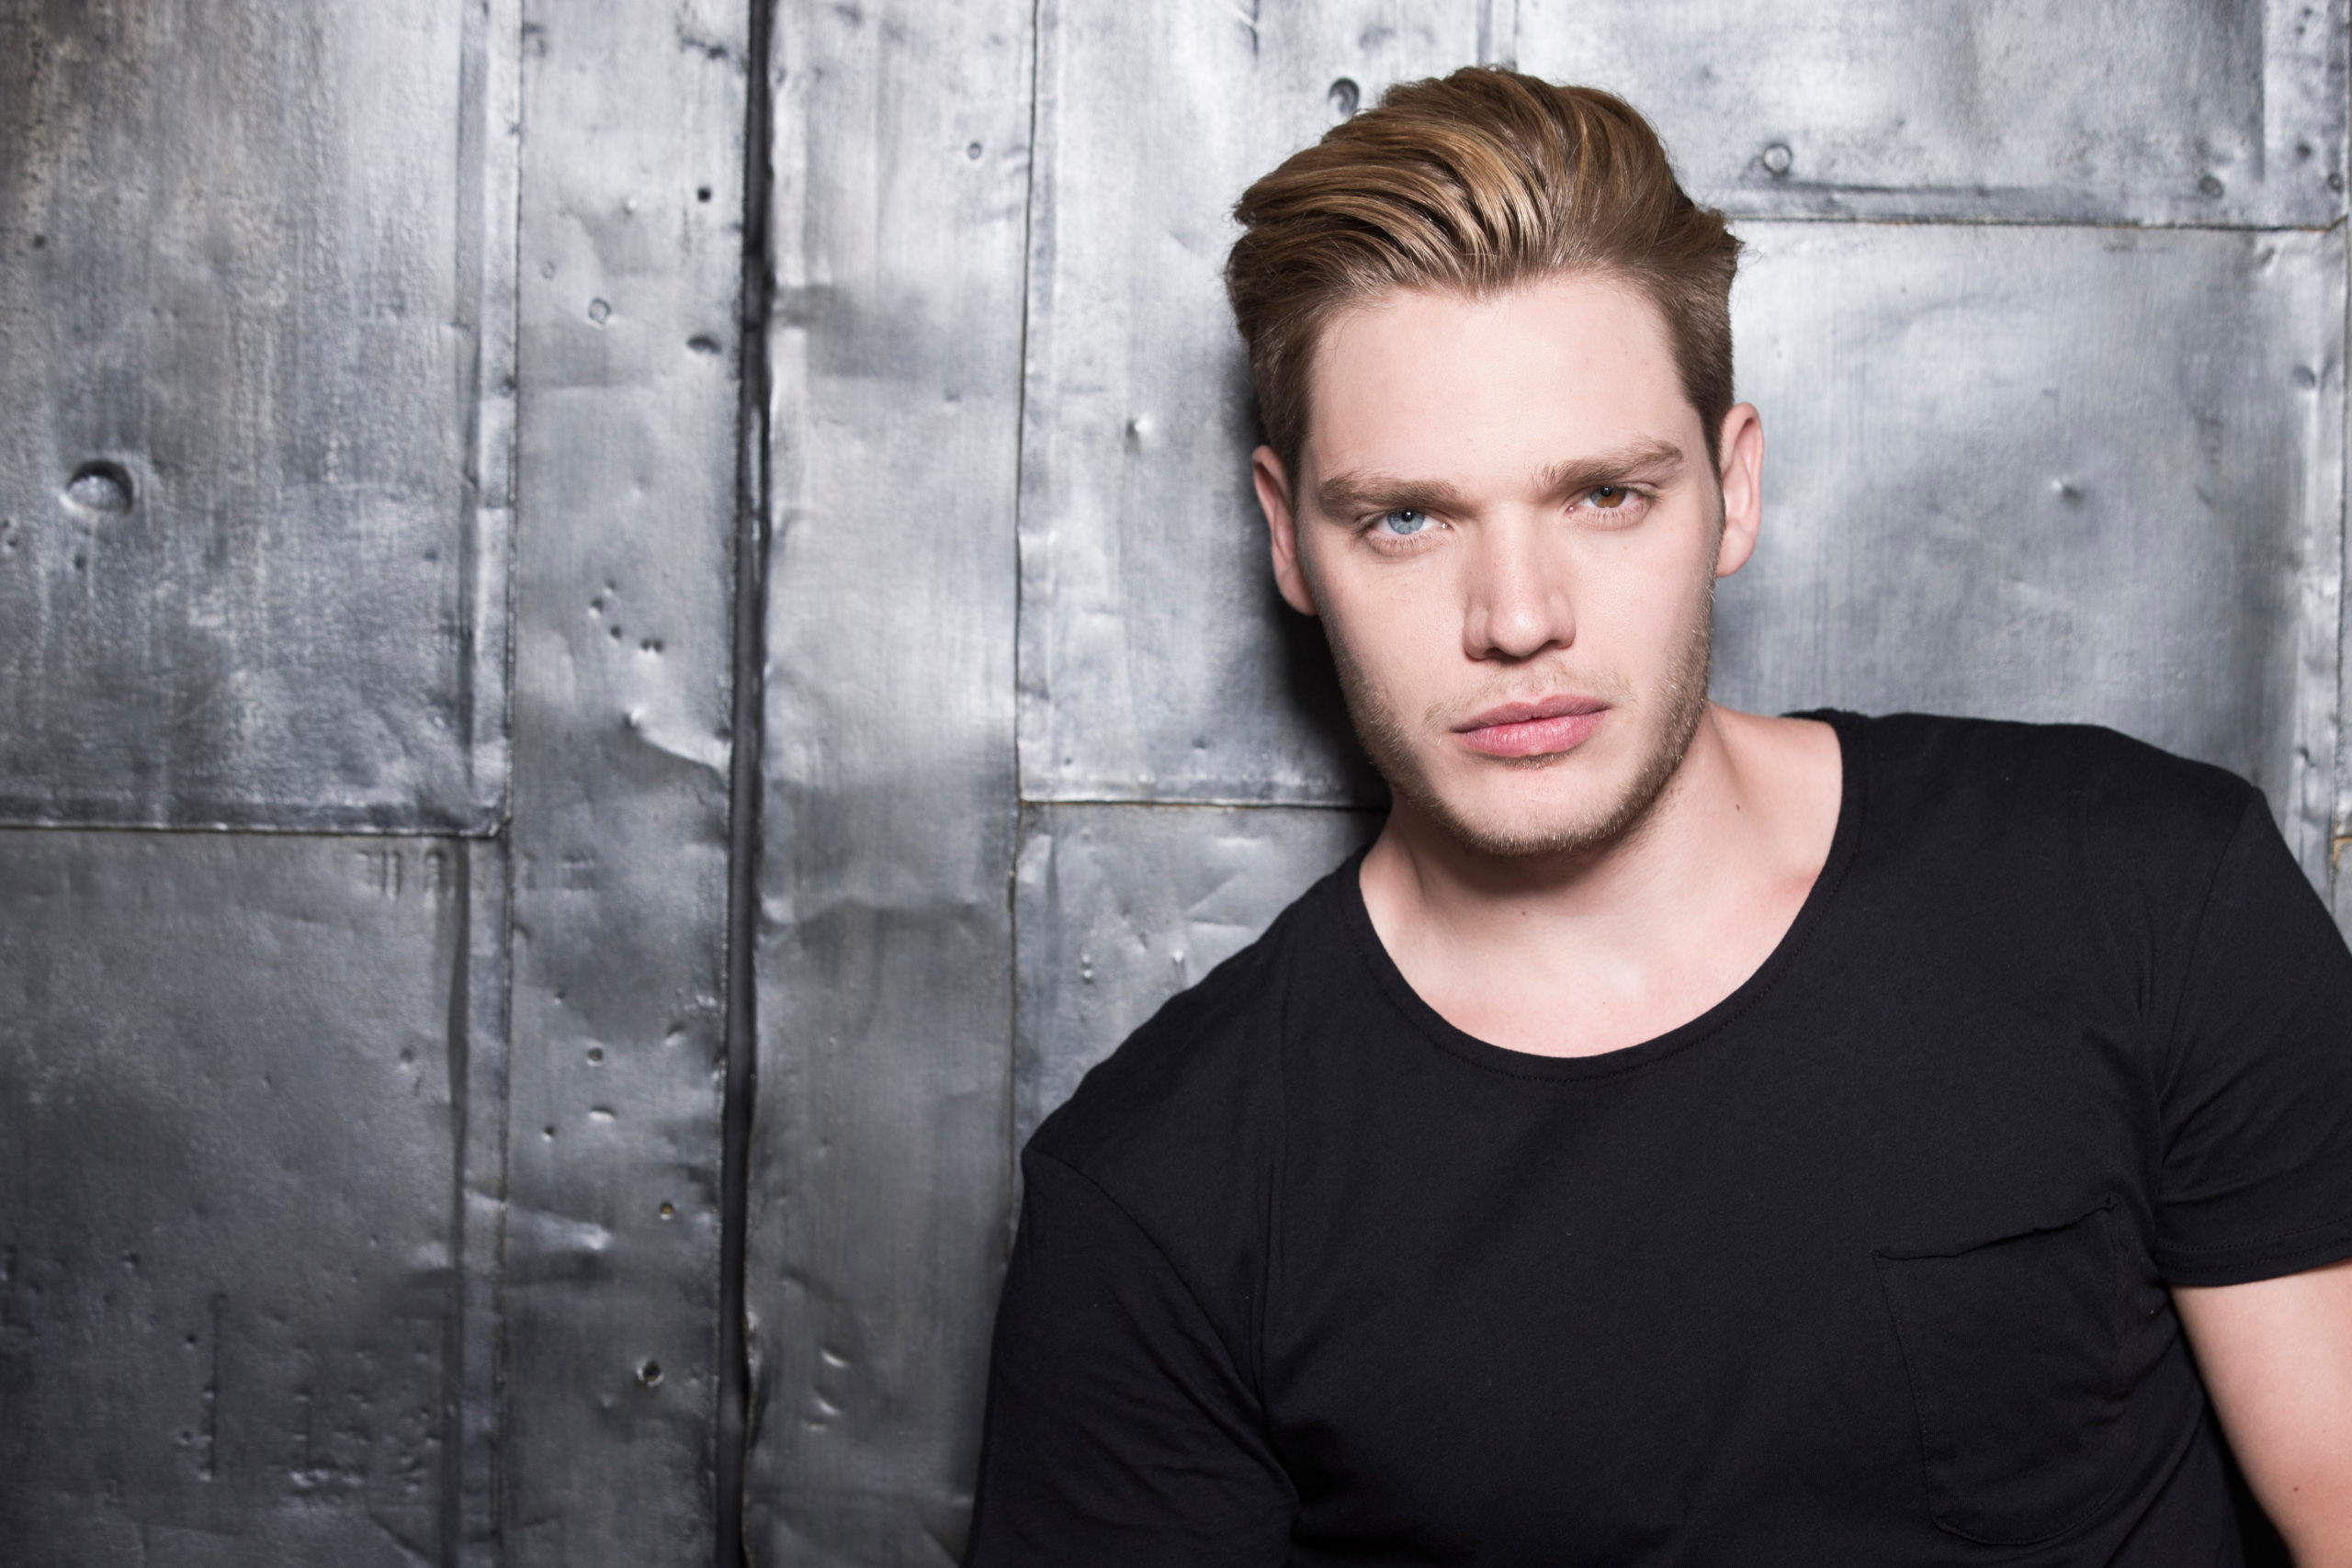 Shadowhunters Dominic Sherwood On Playing A Jace The Mind